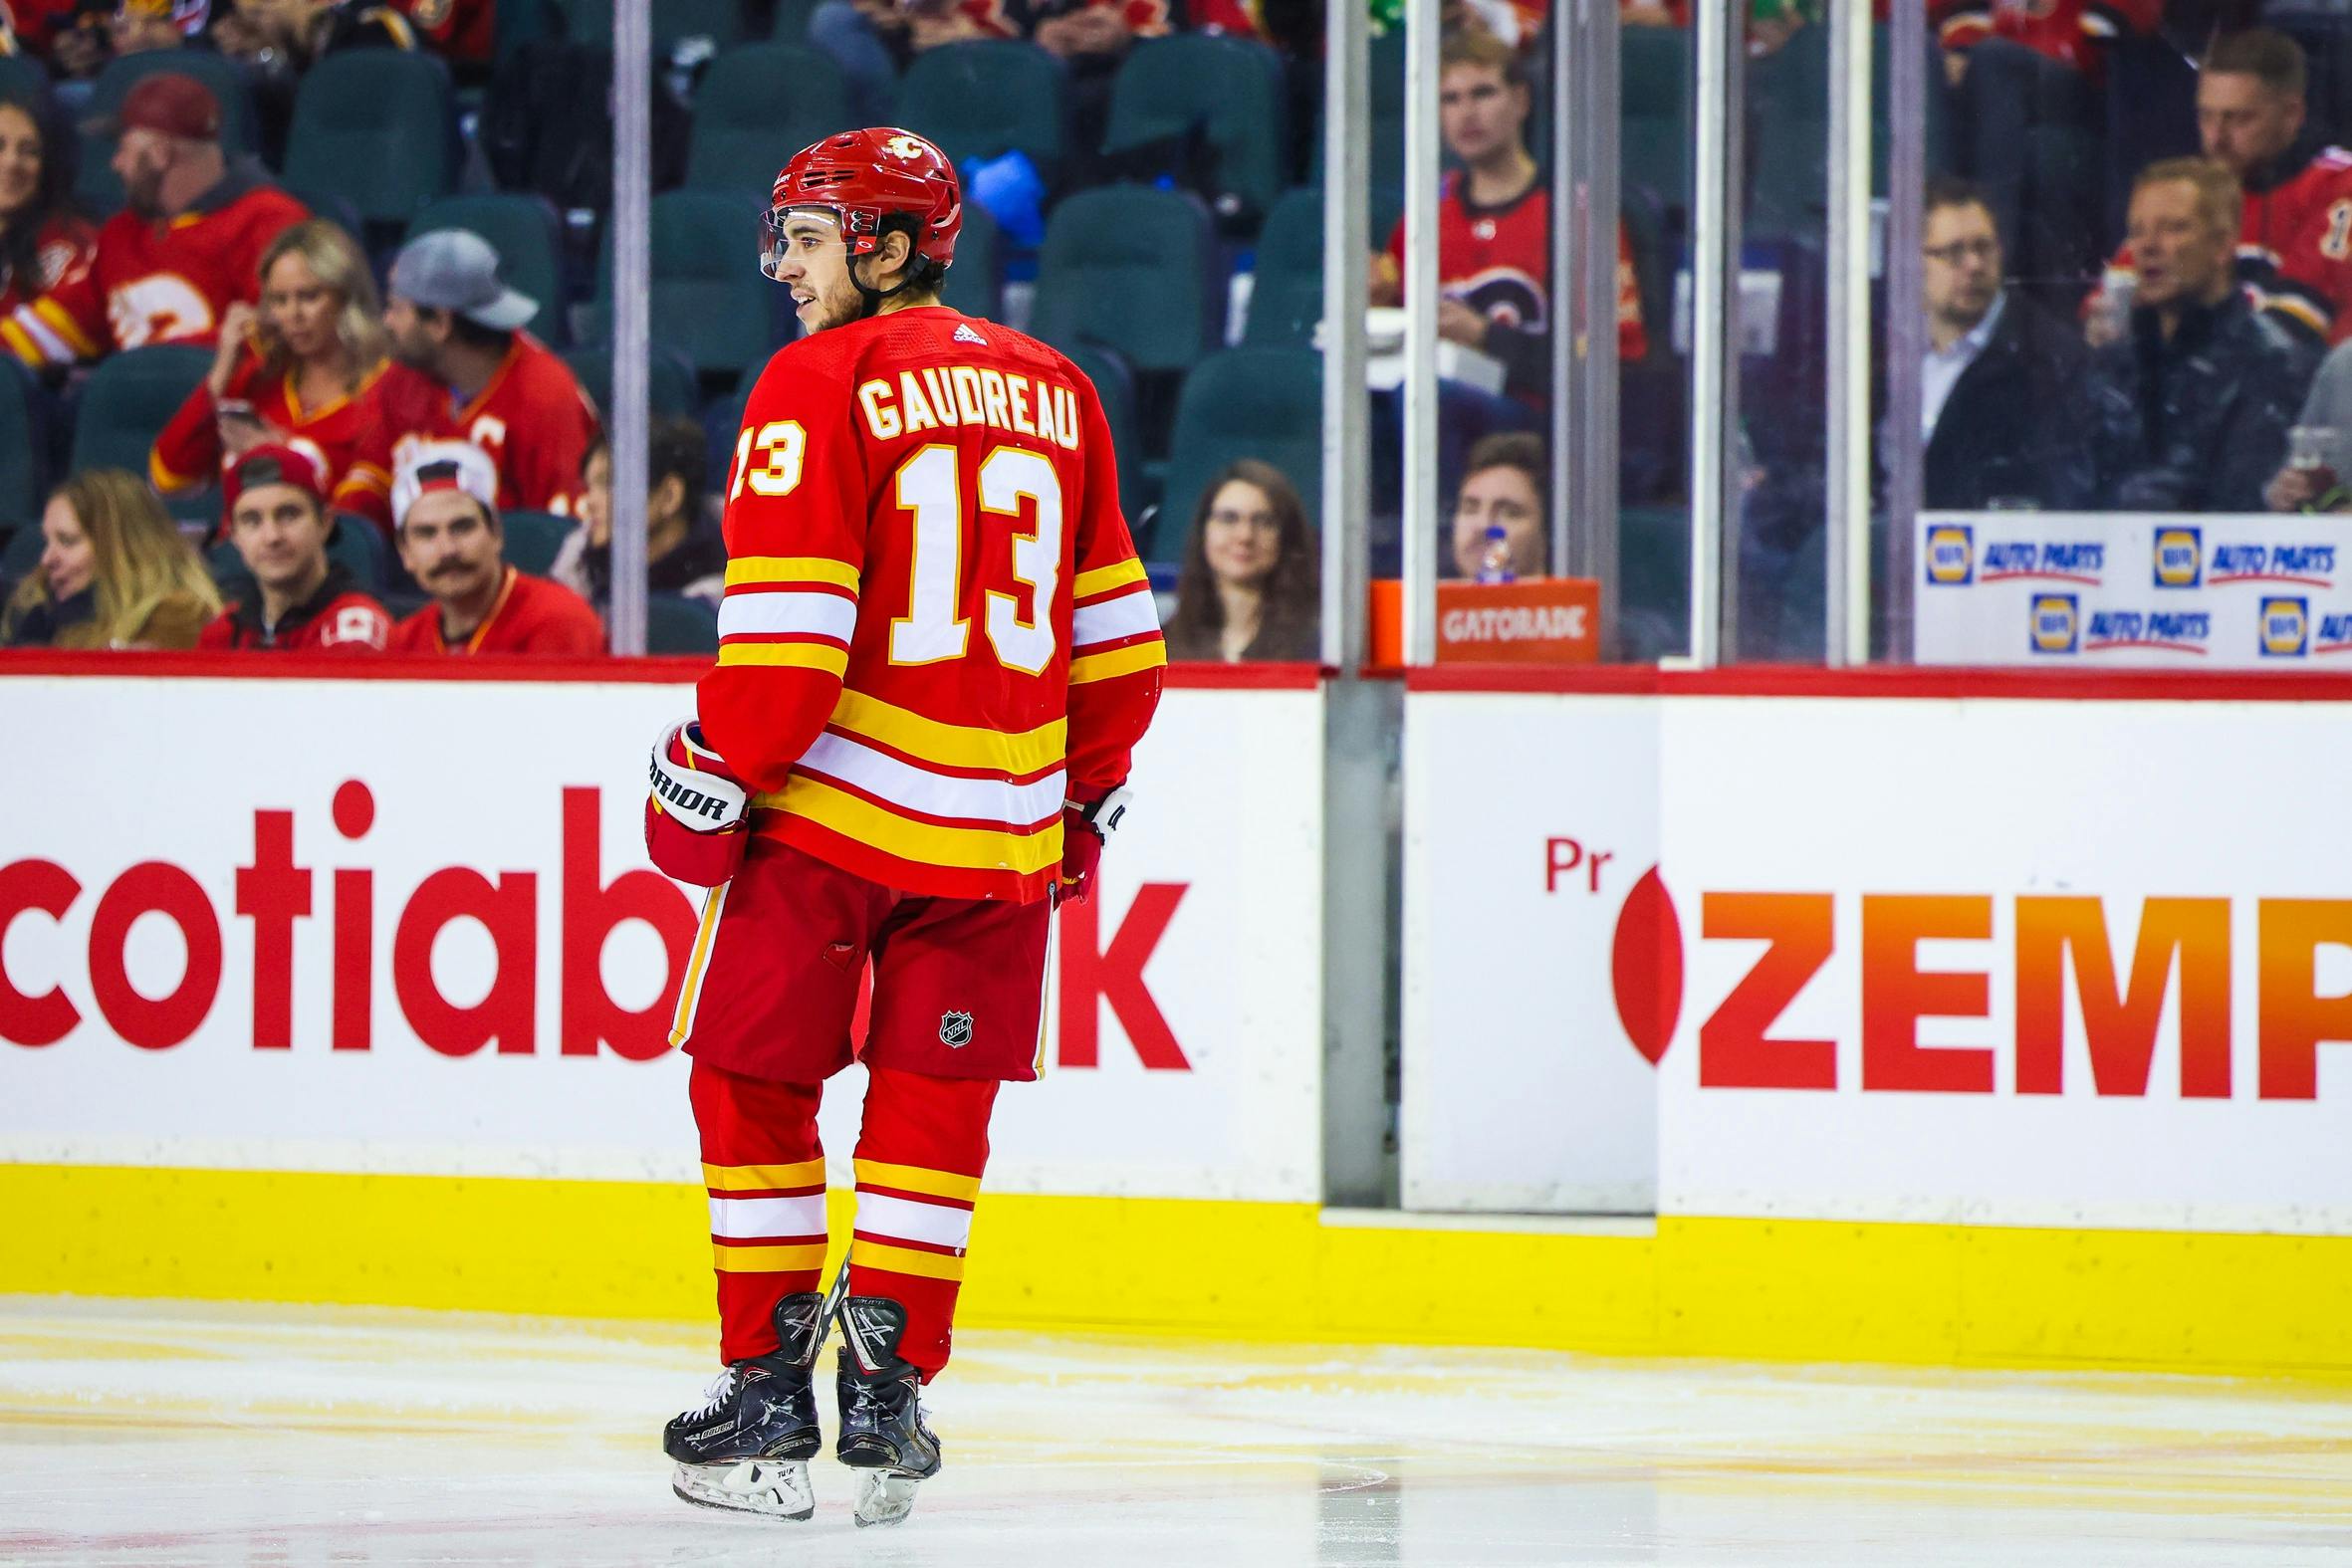 Captaincy, Gaudreau's contract status the plot lines of Calgary